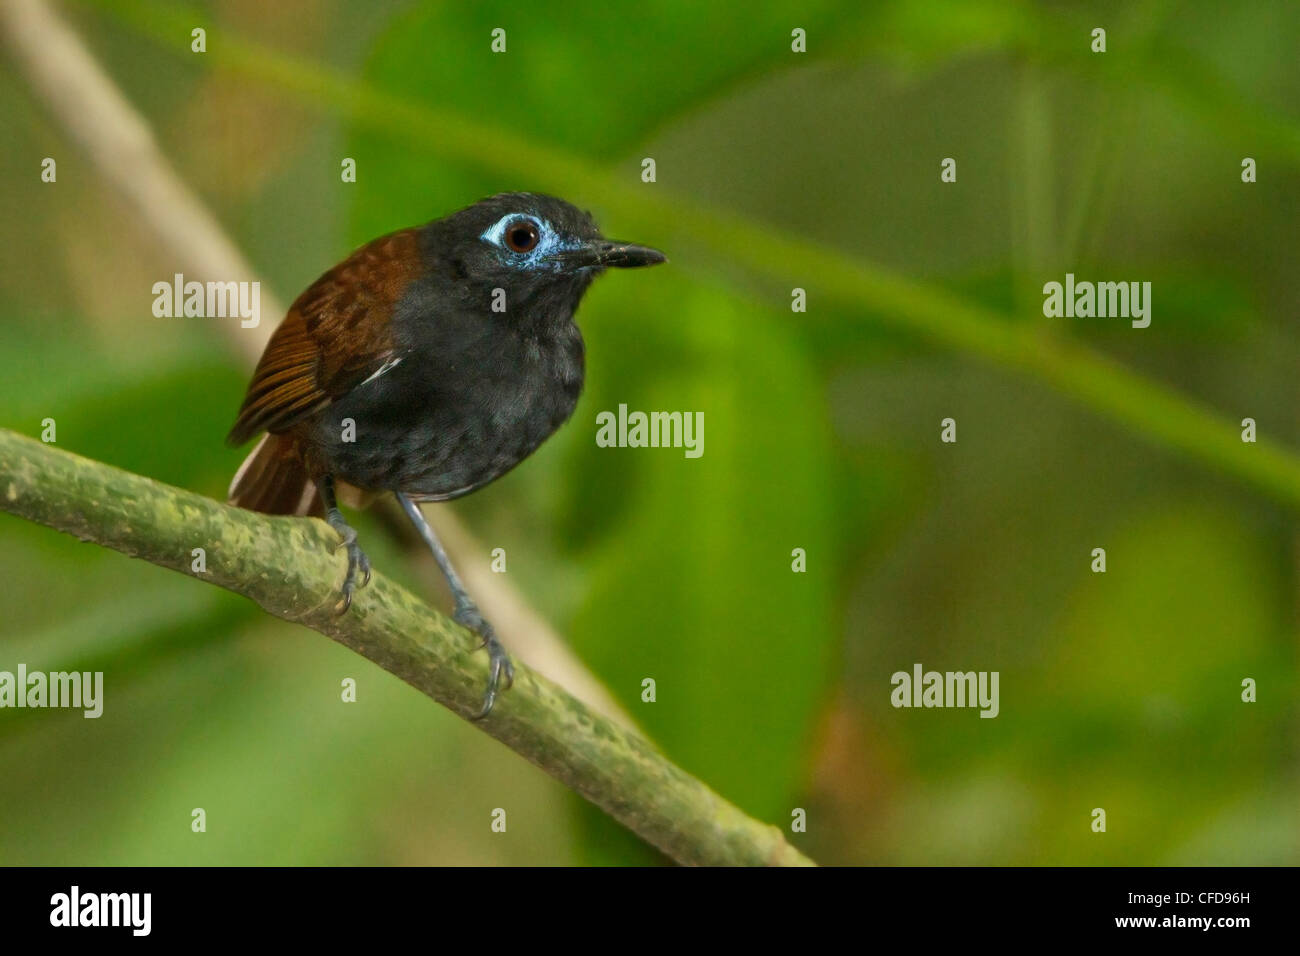 Chestnut-backed Antbird (Myrmeciza exsul) perched on a branch in Costa Rica. Stock Photo